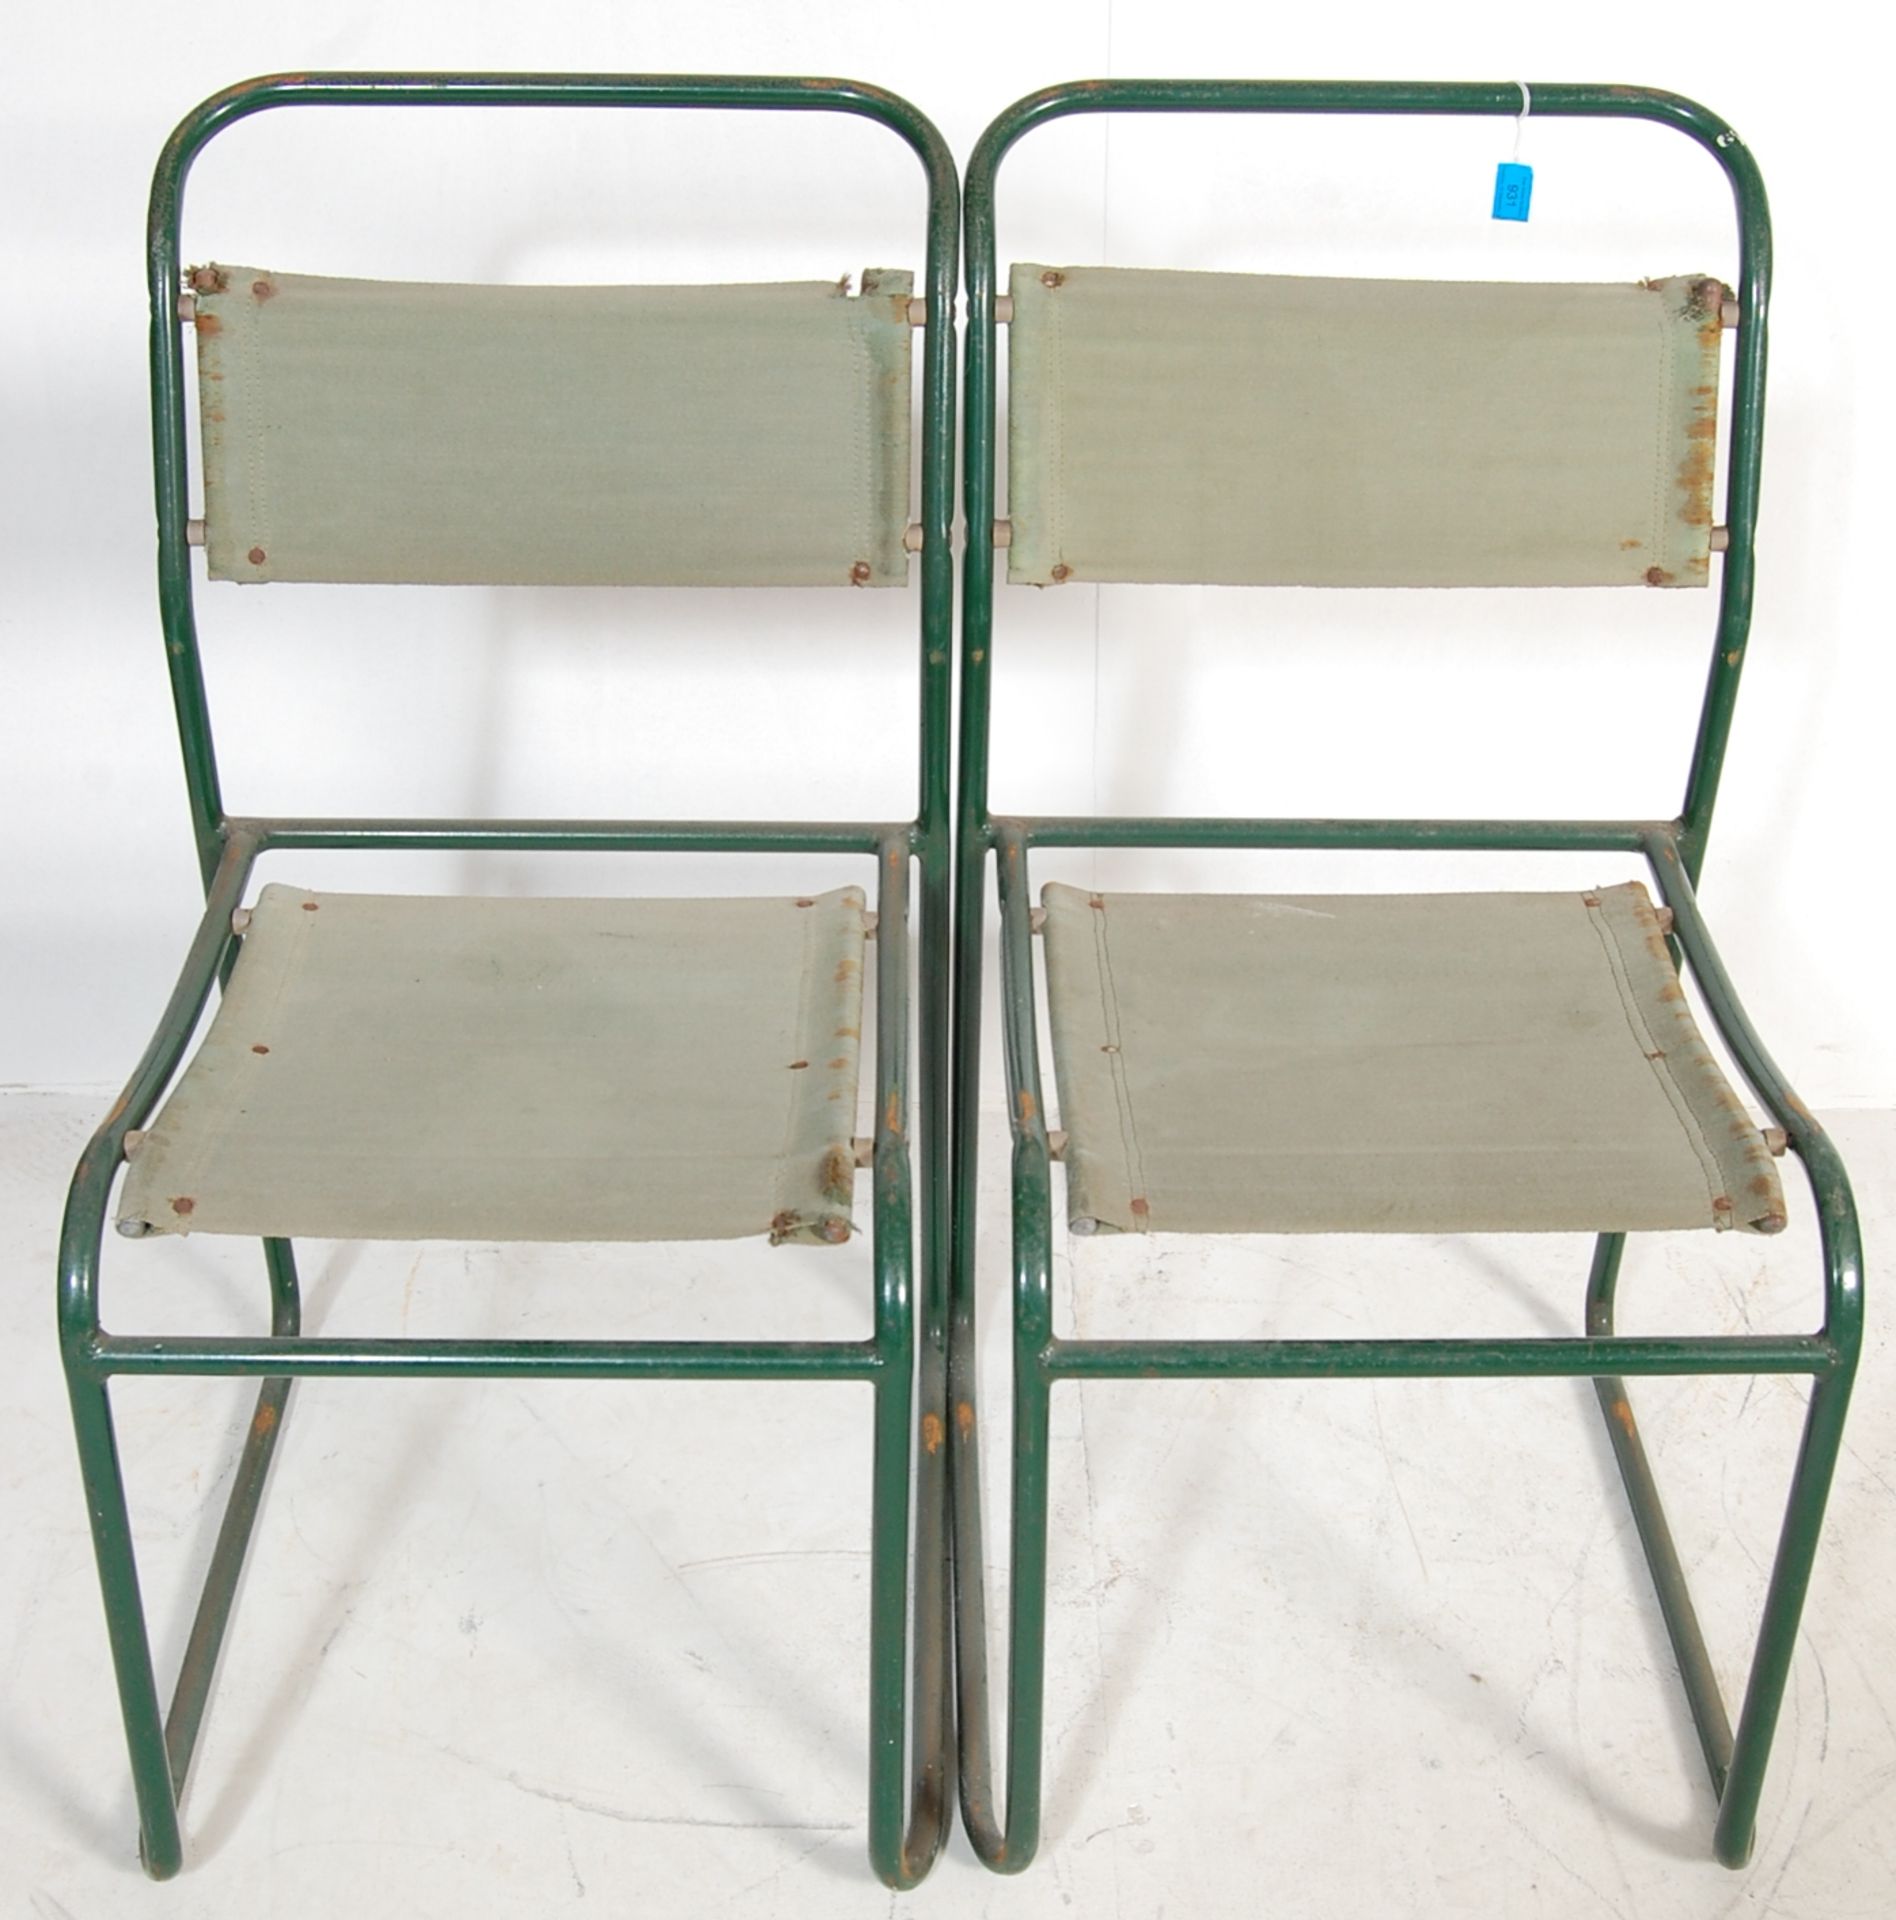 GROUP OF SIX 20TH CENTURY VINTAGE INDUSTRIAL RETRO VINTAGE TUBULAR FRAMED CHAIRS - Image 4 of 5